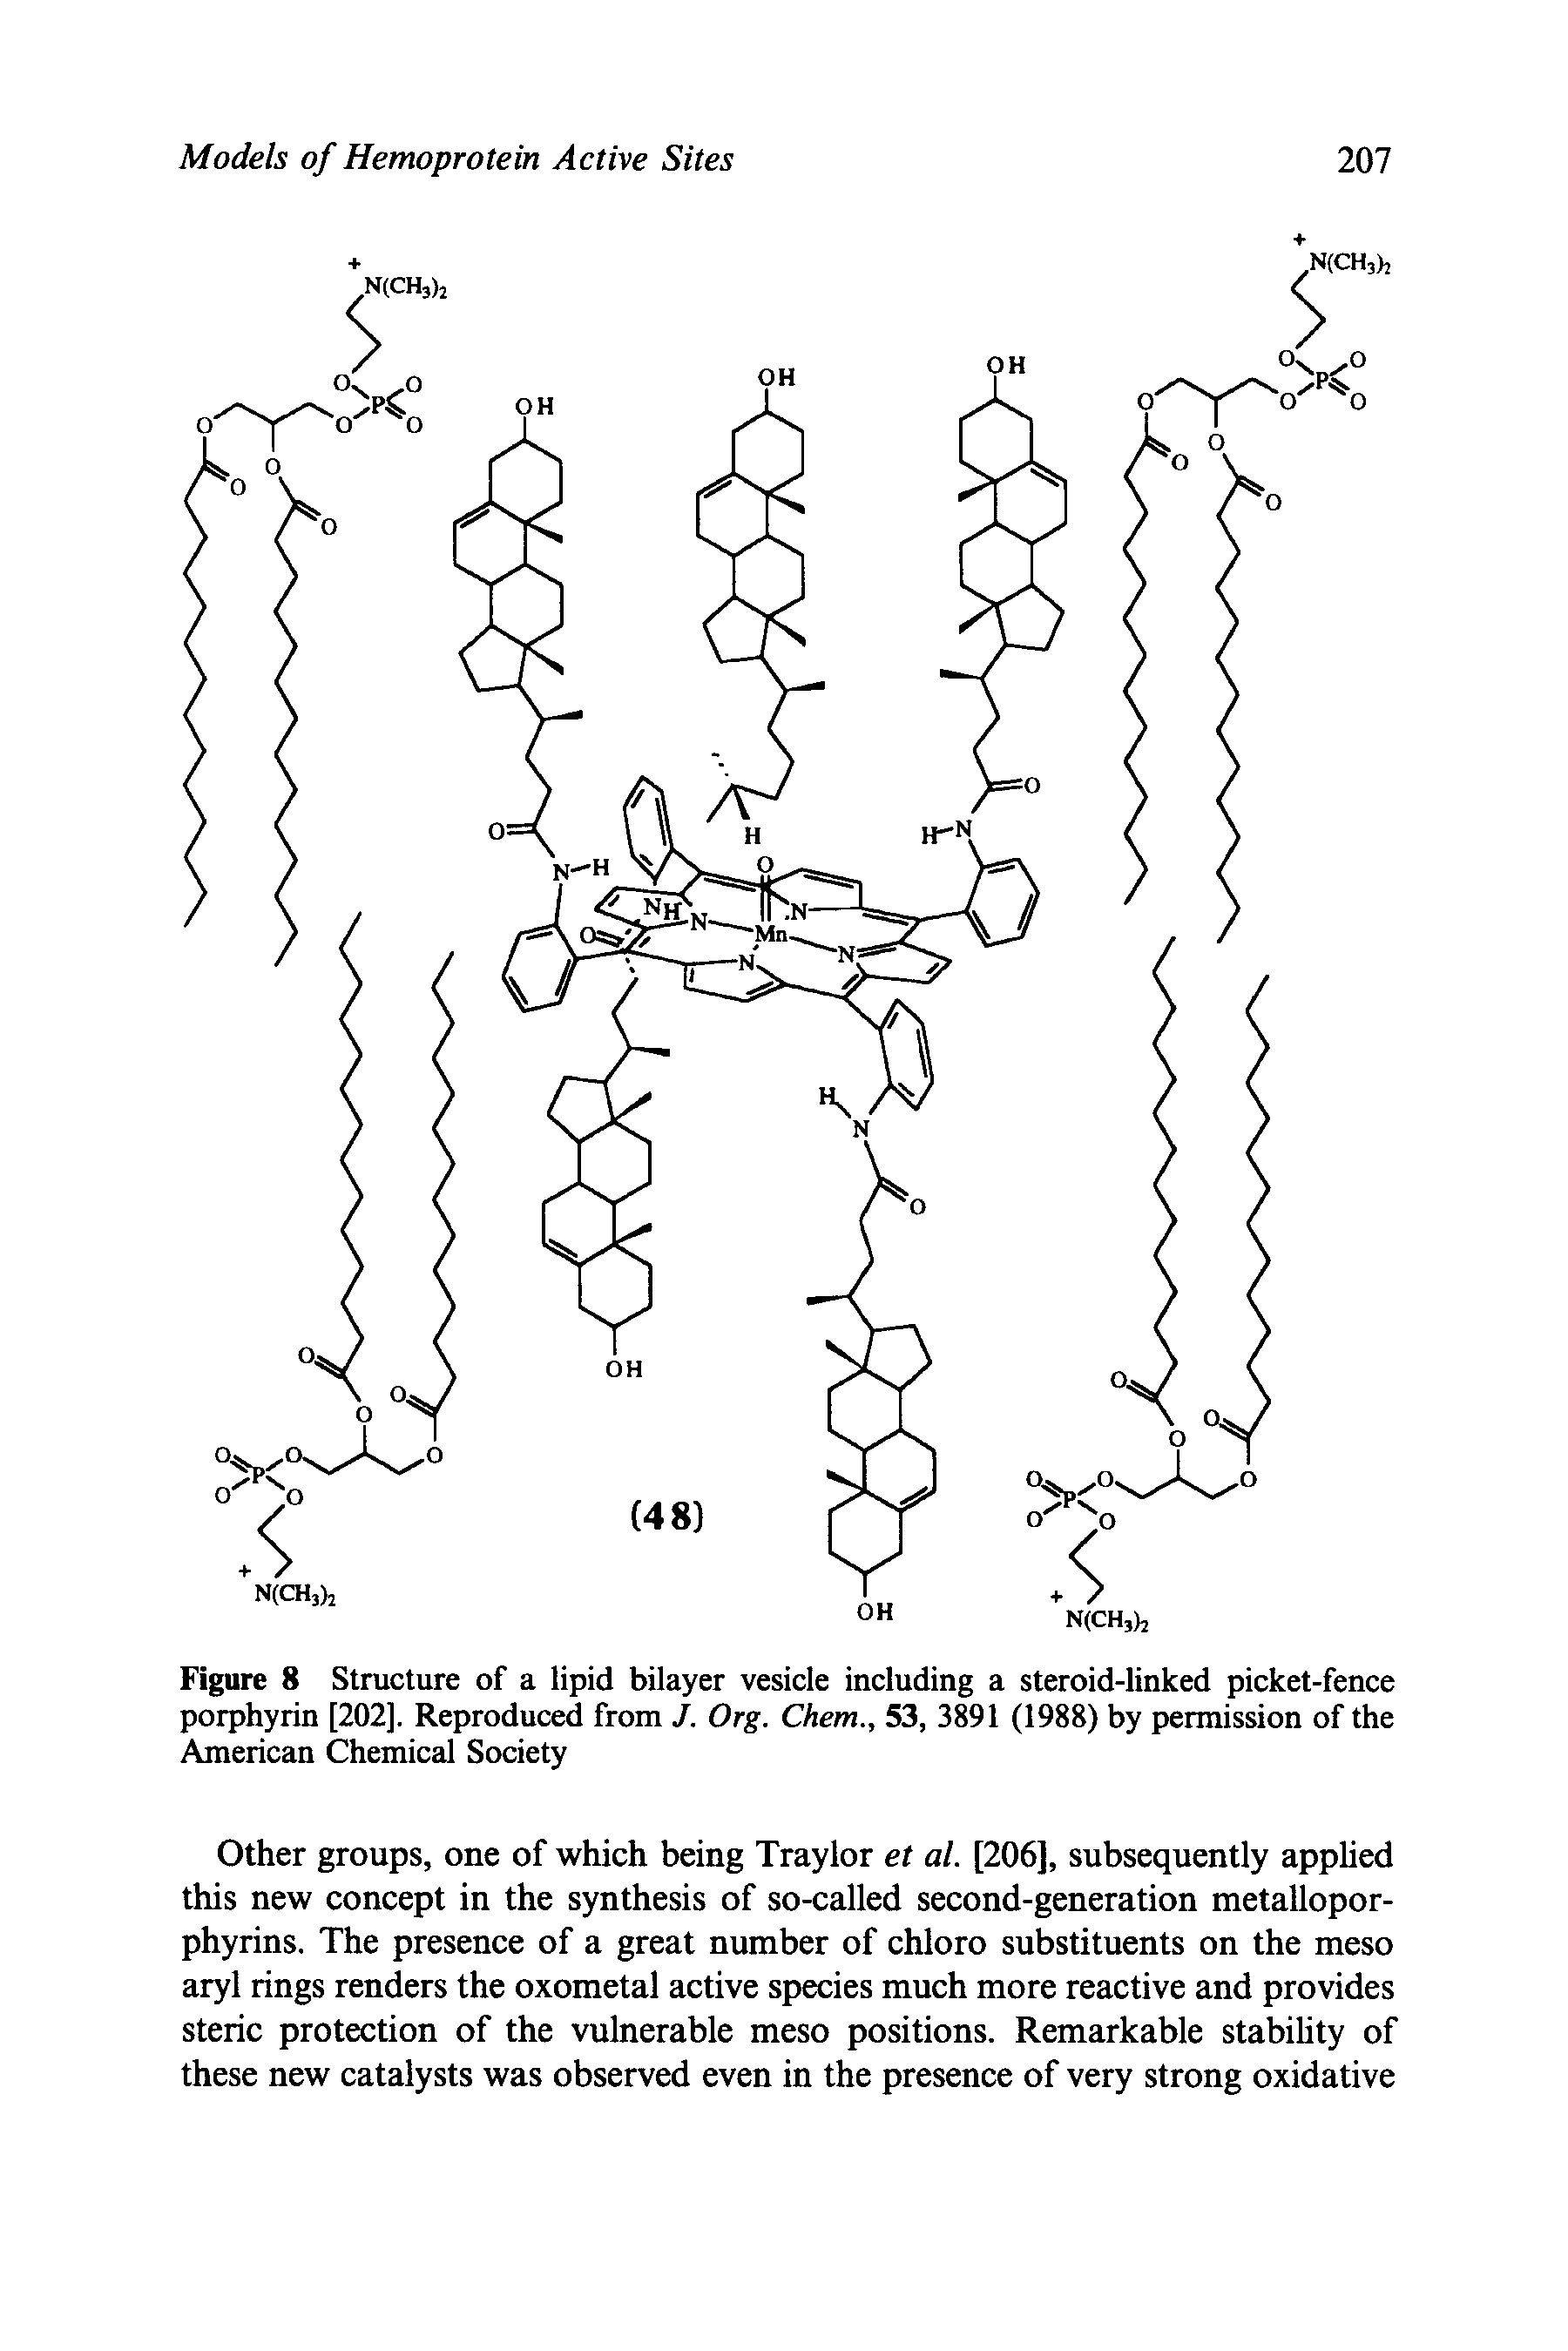 Figure 8 Structure of a lipid bilayer vesicle including a steroid-linked picket-fence porphyrin [202], Reproduced from J. Org. Chem., 53, 3891 (1988) by permission of the American Chemical Society...